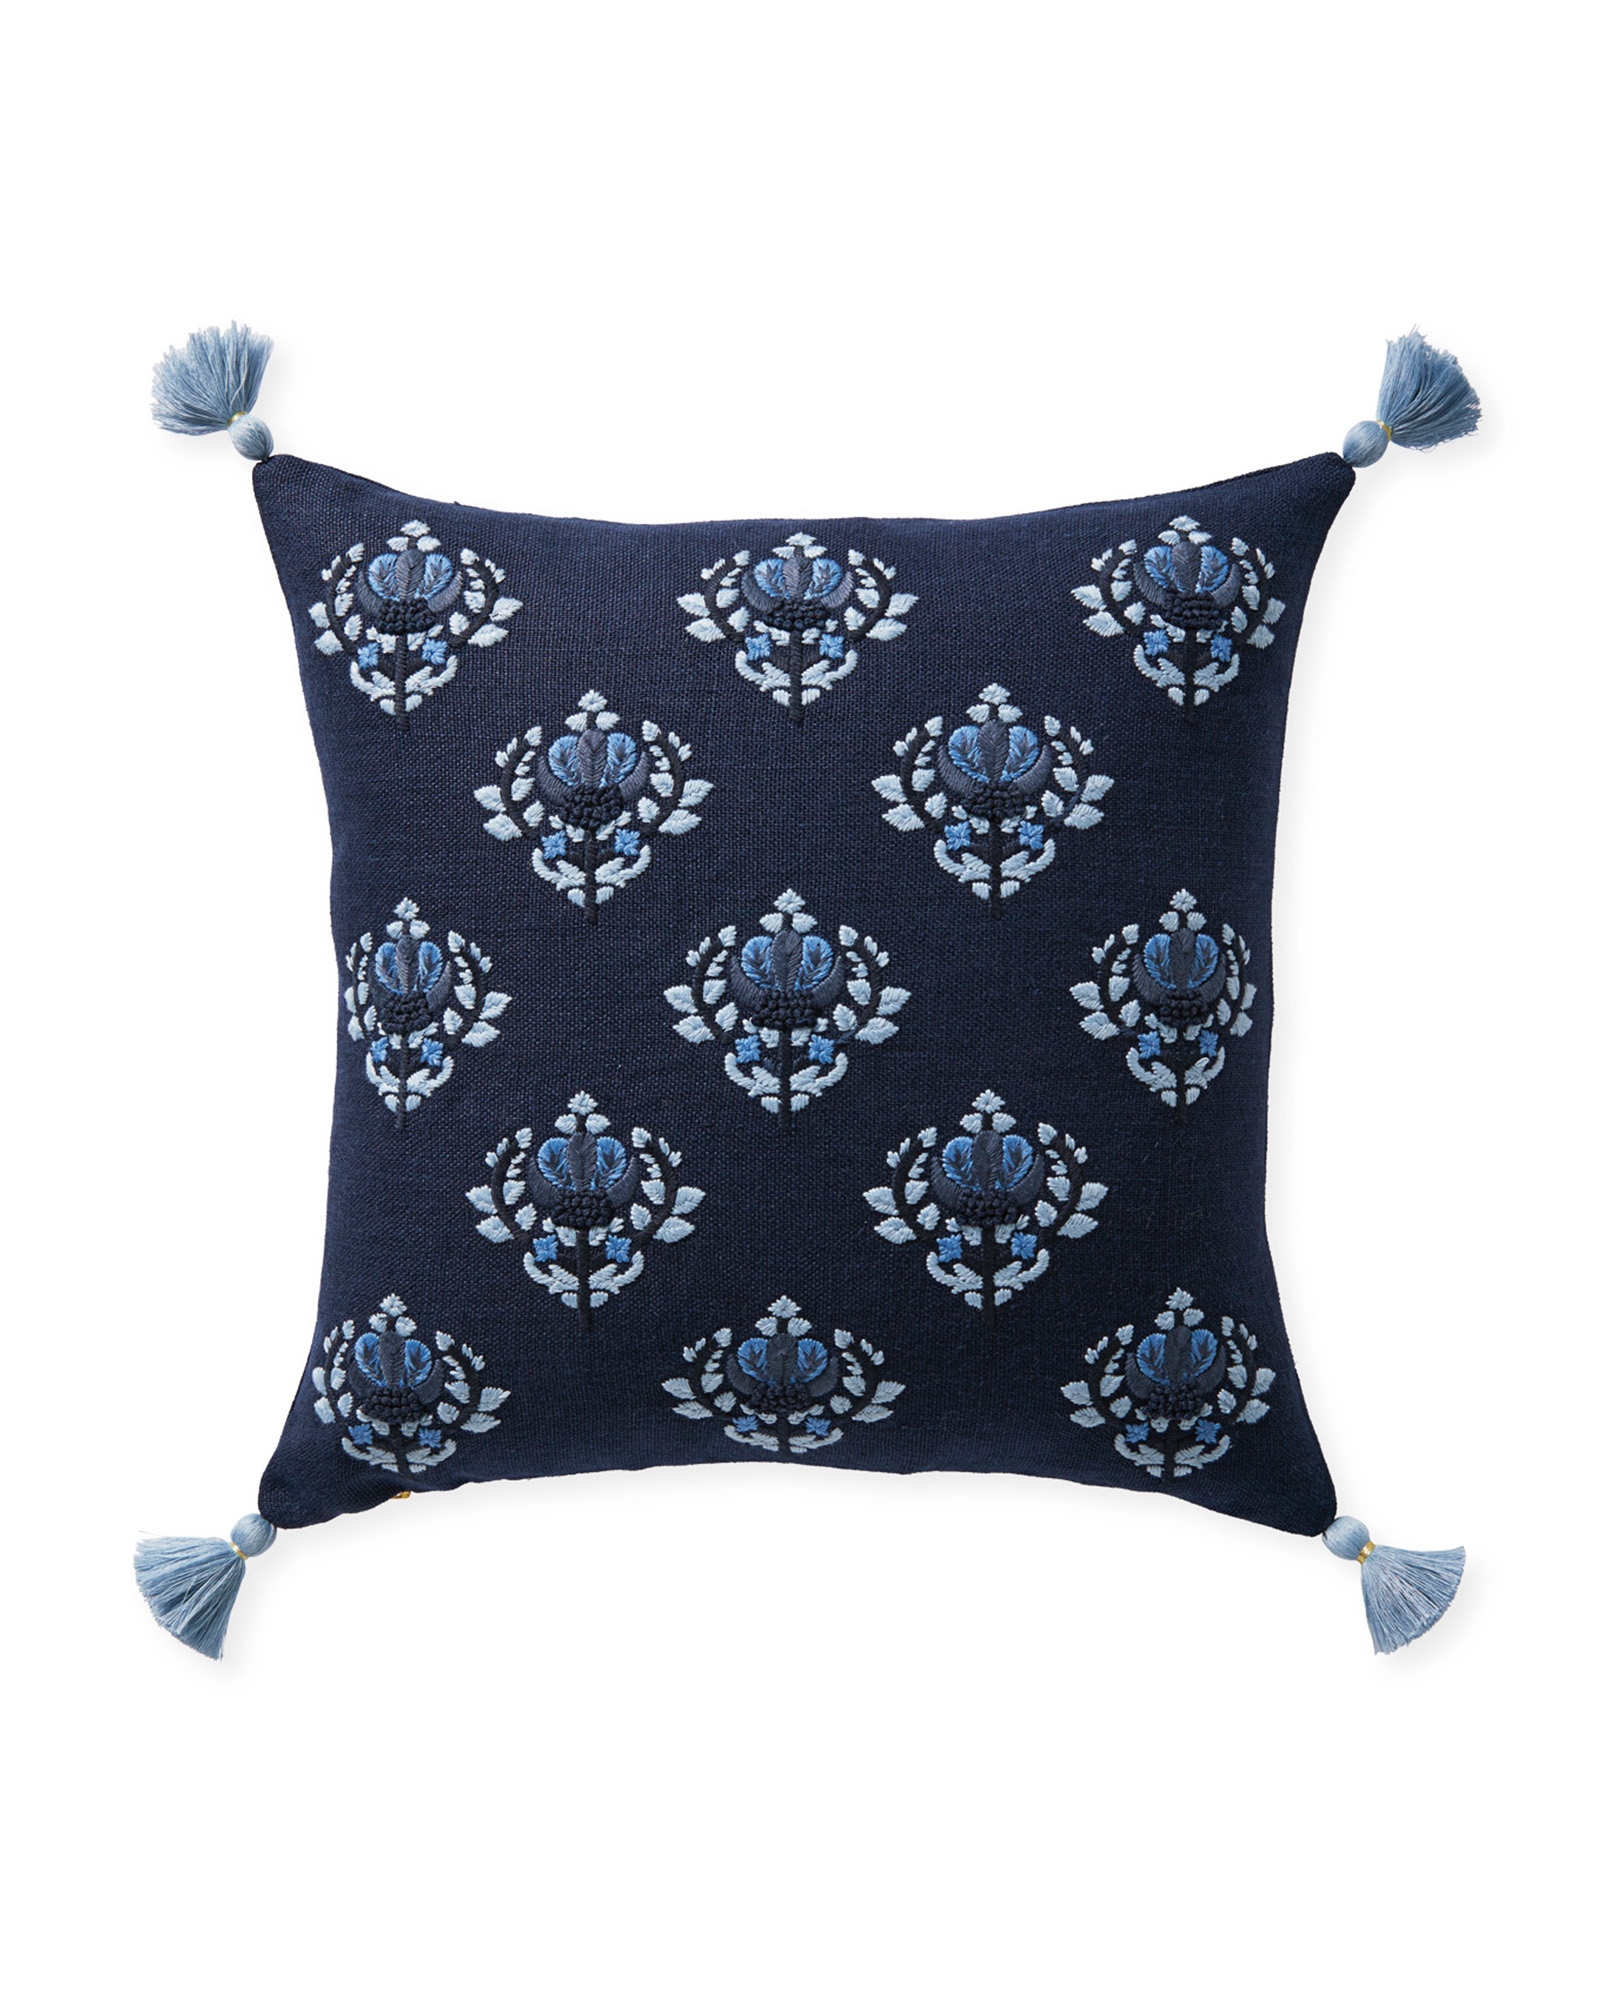 Kemp 20" SQ Pillow Cover - Navy - Insert sold separately - Image 0